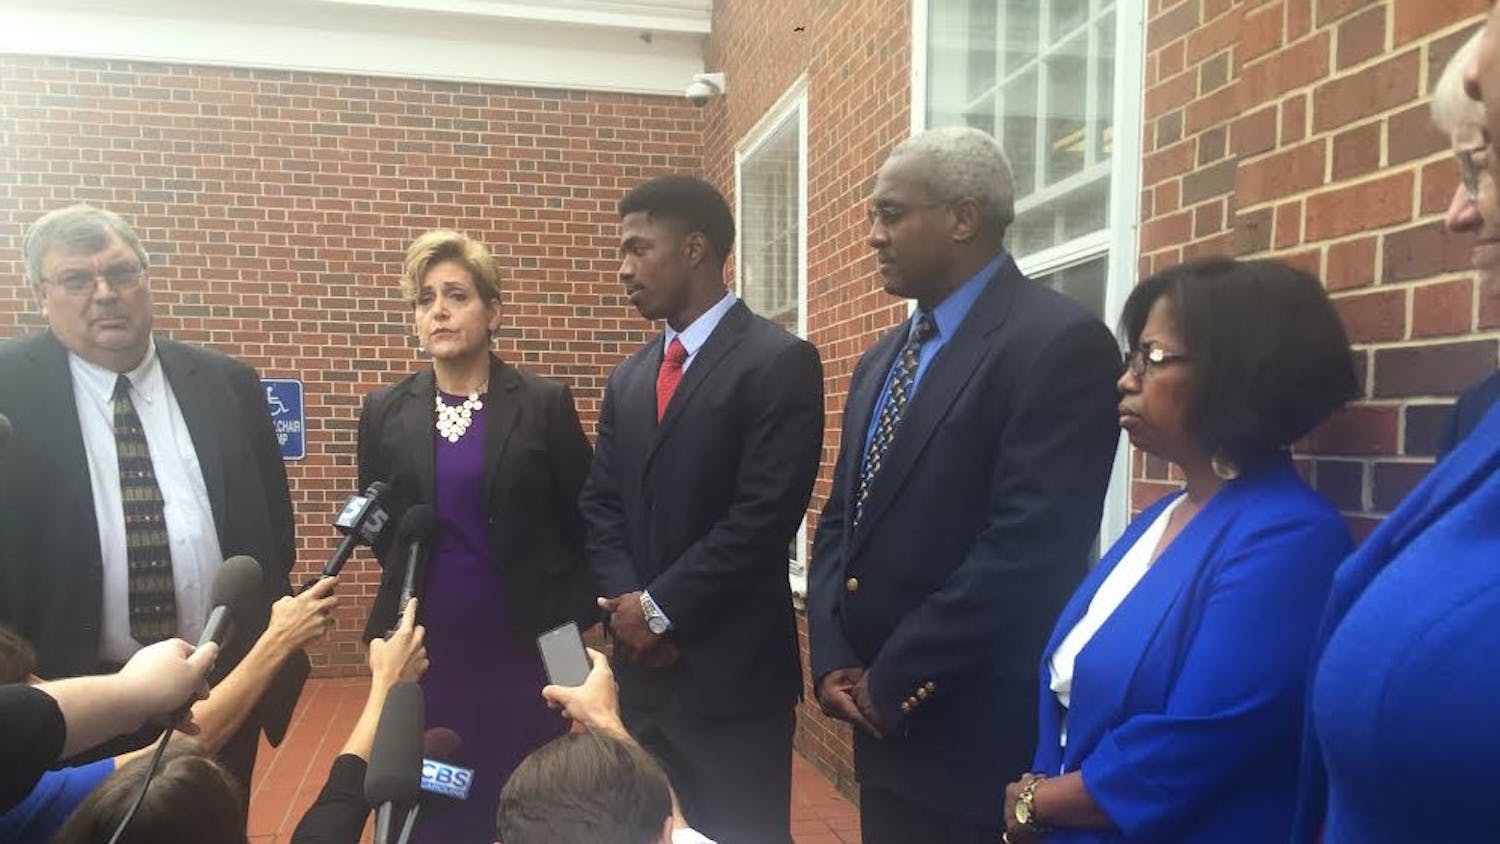 Allen Artis, surrounded by his lawyer and parents, speaks to the media after his court appearance.&nbsp;